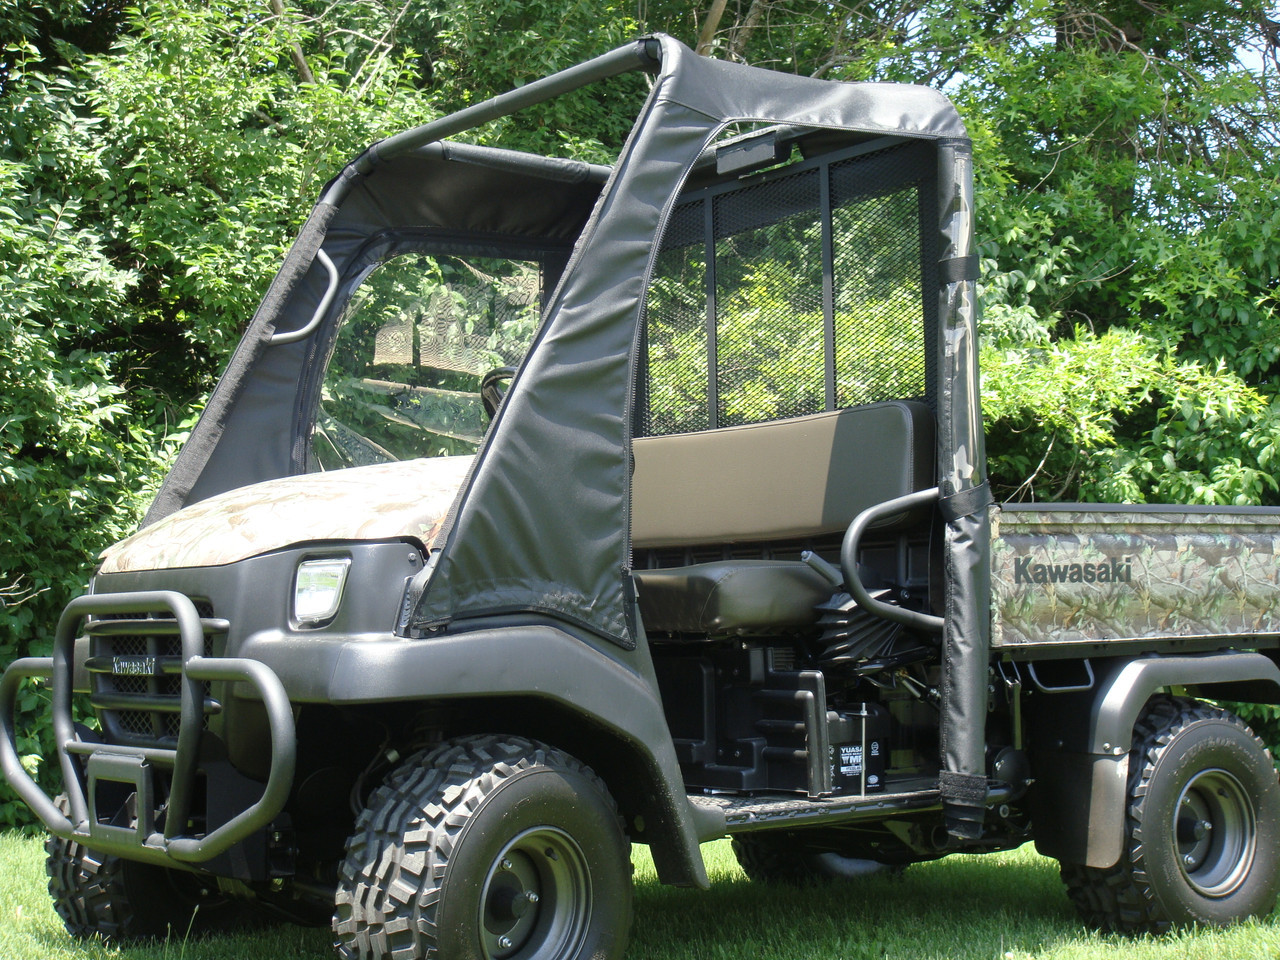 3 Star side x side Kawasaki Mule 3000/3010 soft doors front and side angle view close up